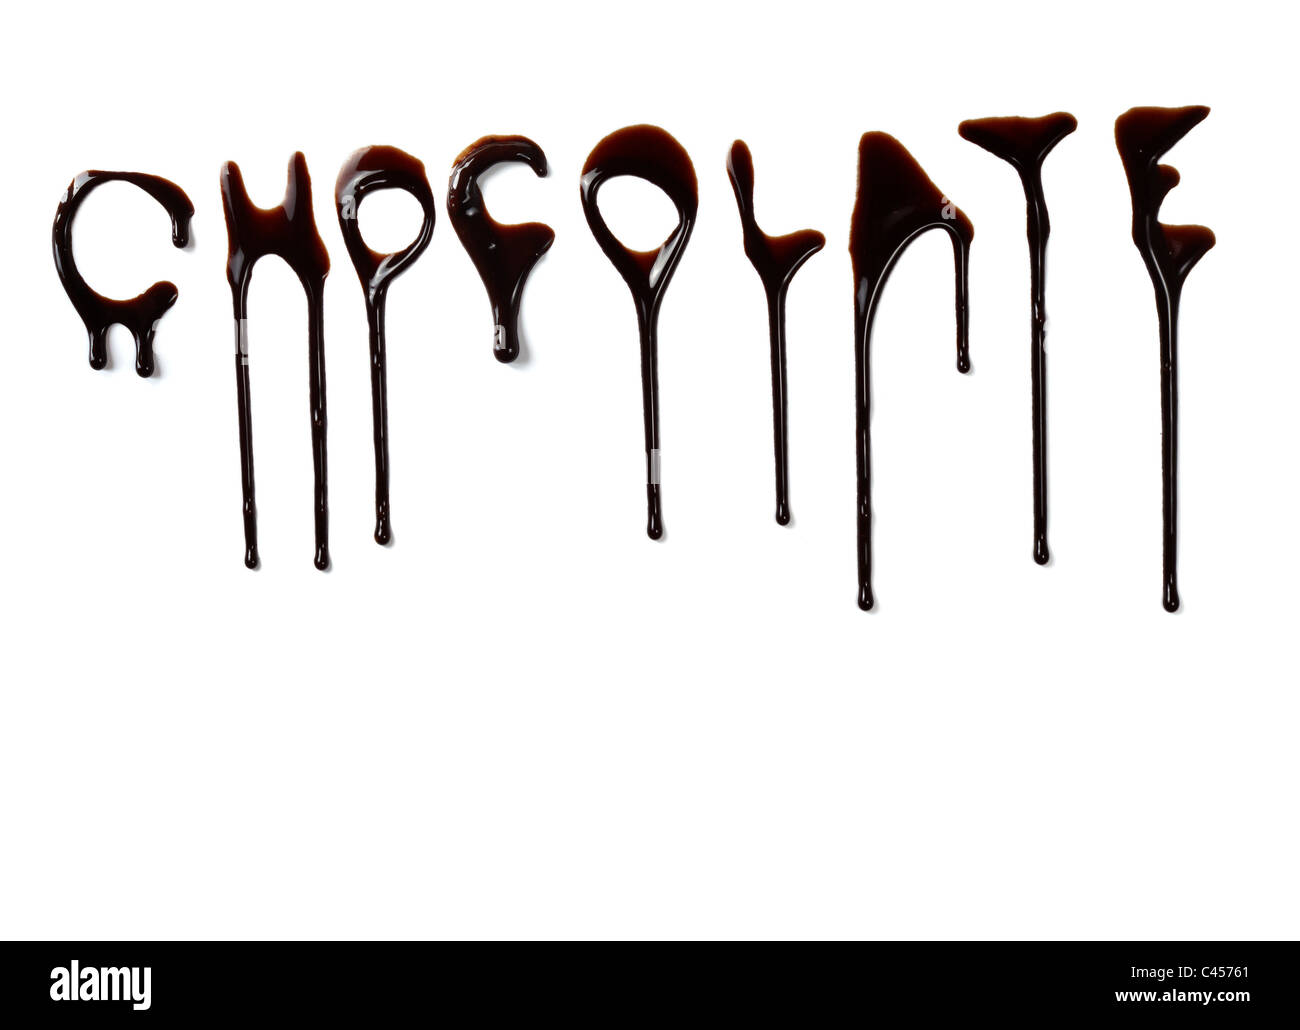 close up of chocolate syrup Stock Photo